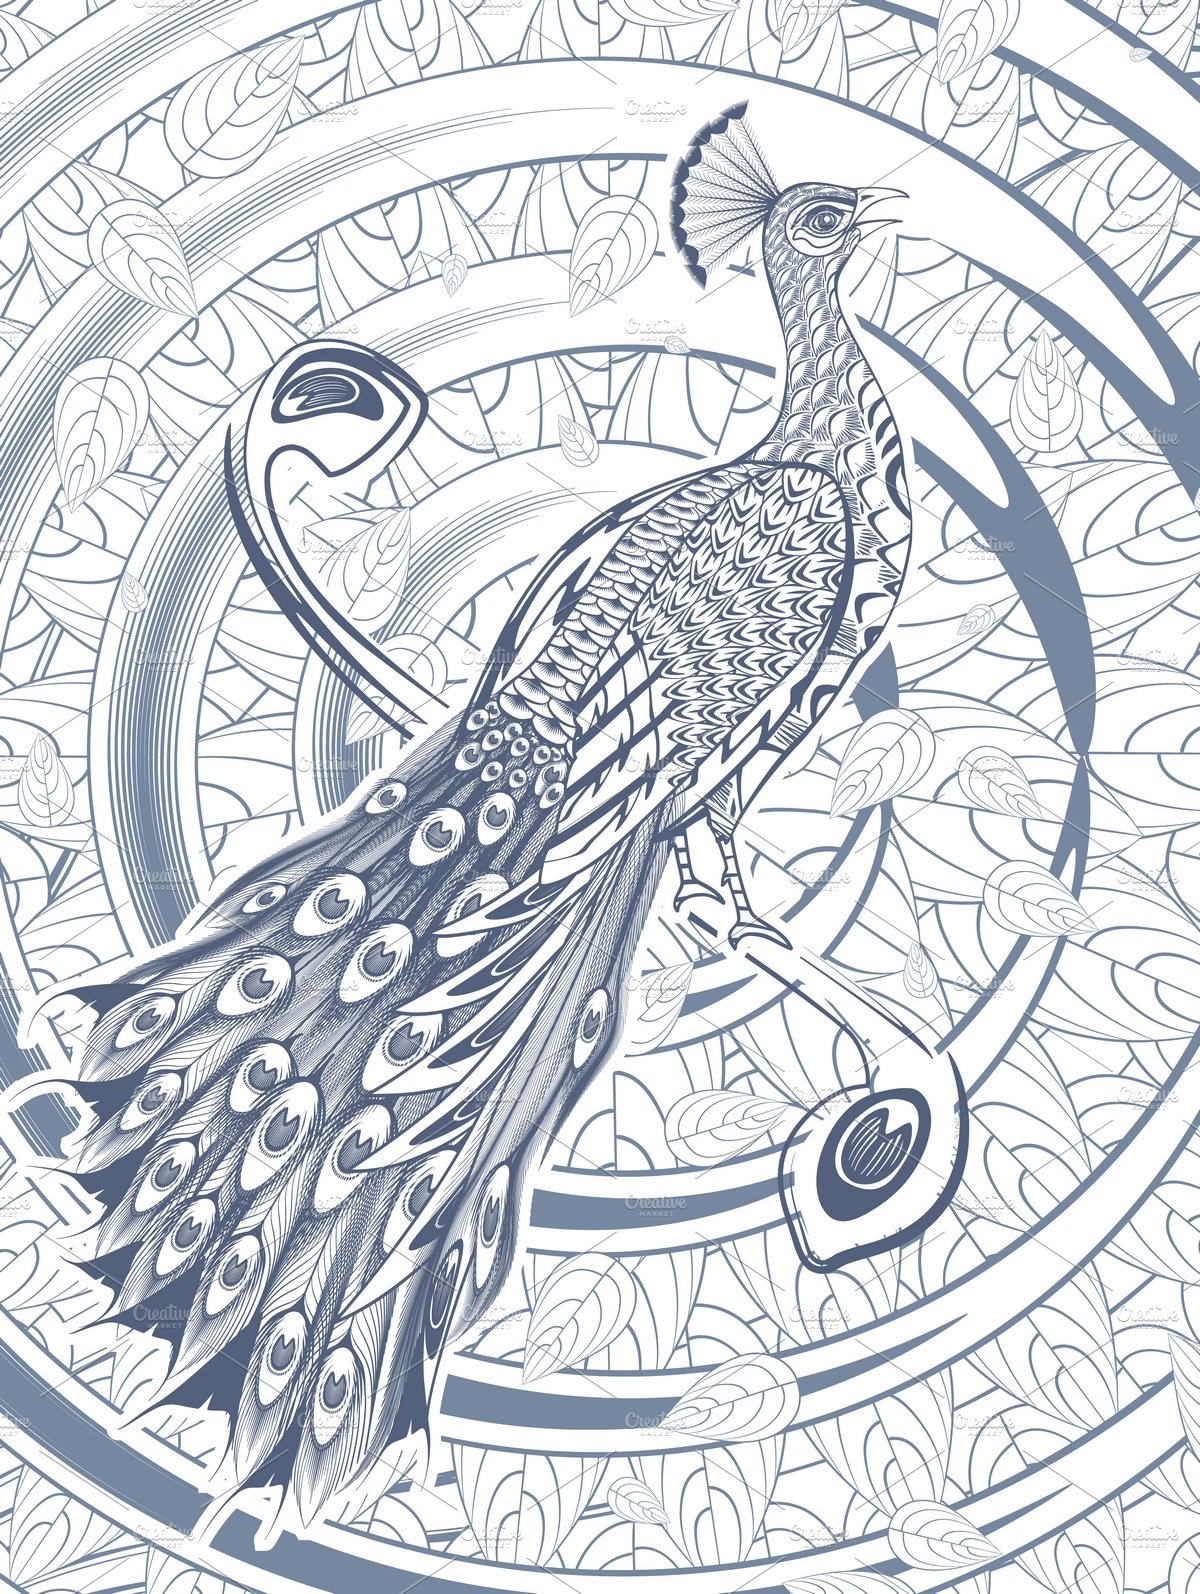 Sketch Beautiful Peacock Template cover image.